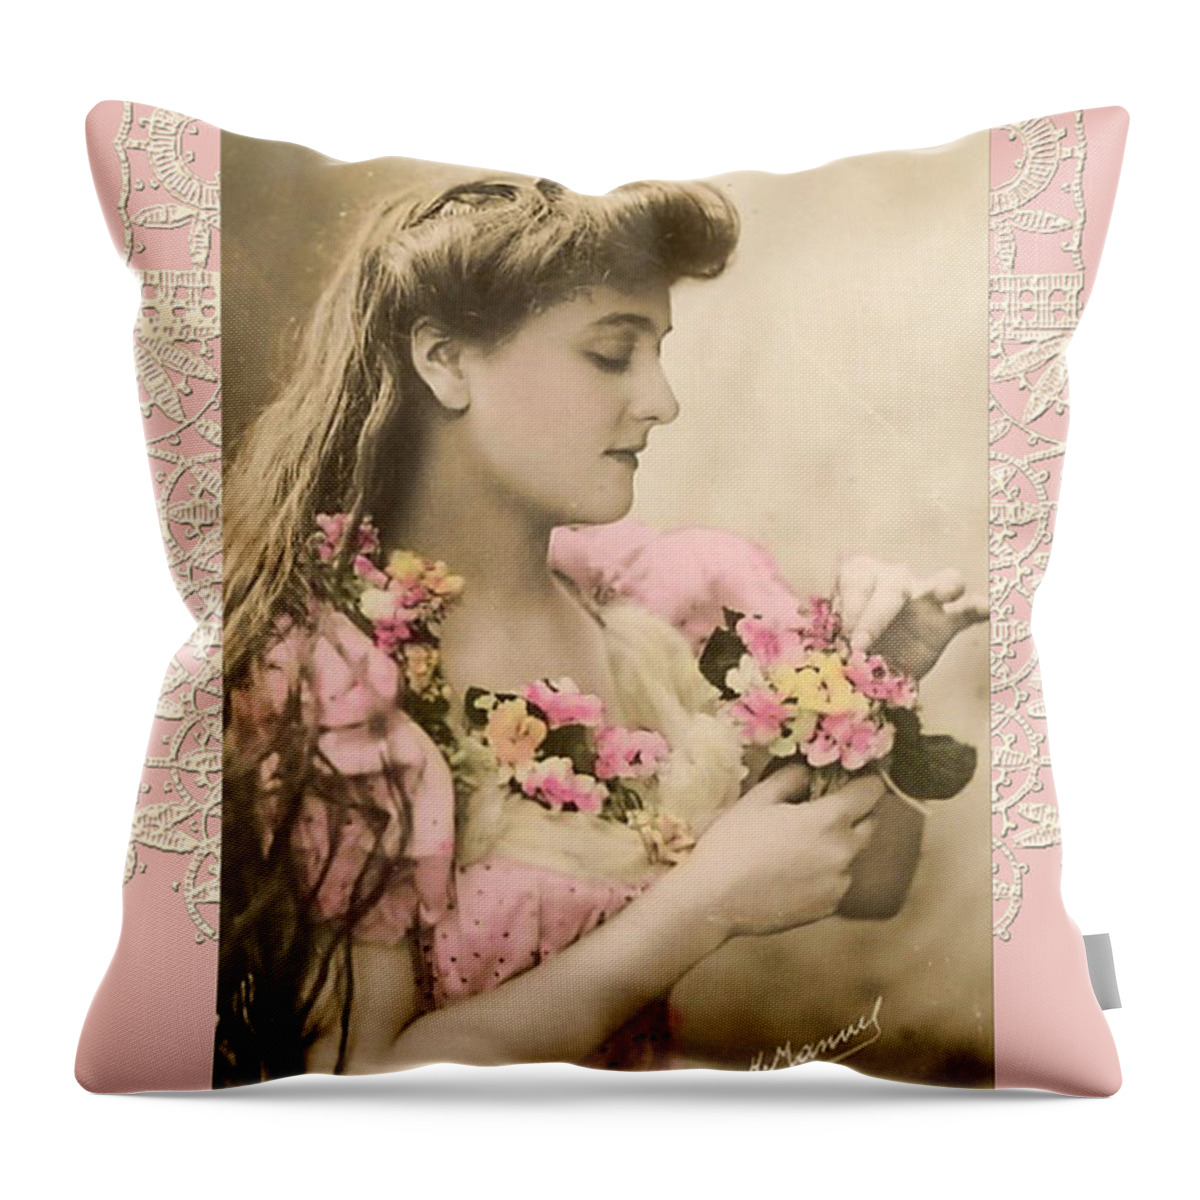 Vintage Throw Pillow featuring the digital art Lace And Poisies Victorian Lady by Denise Beverly